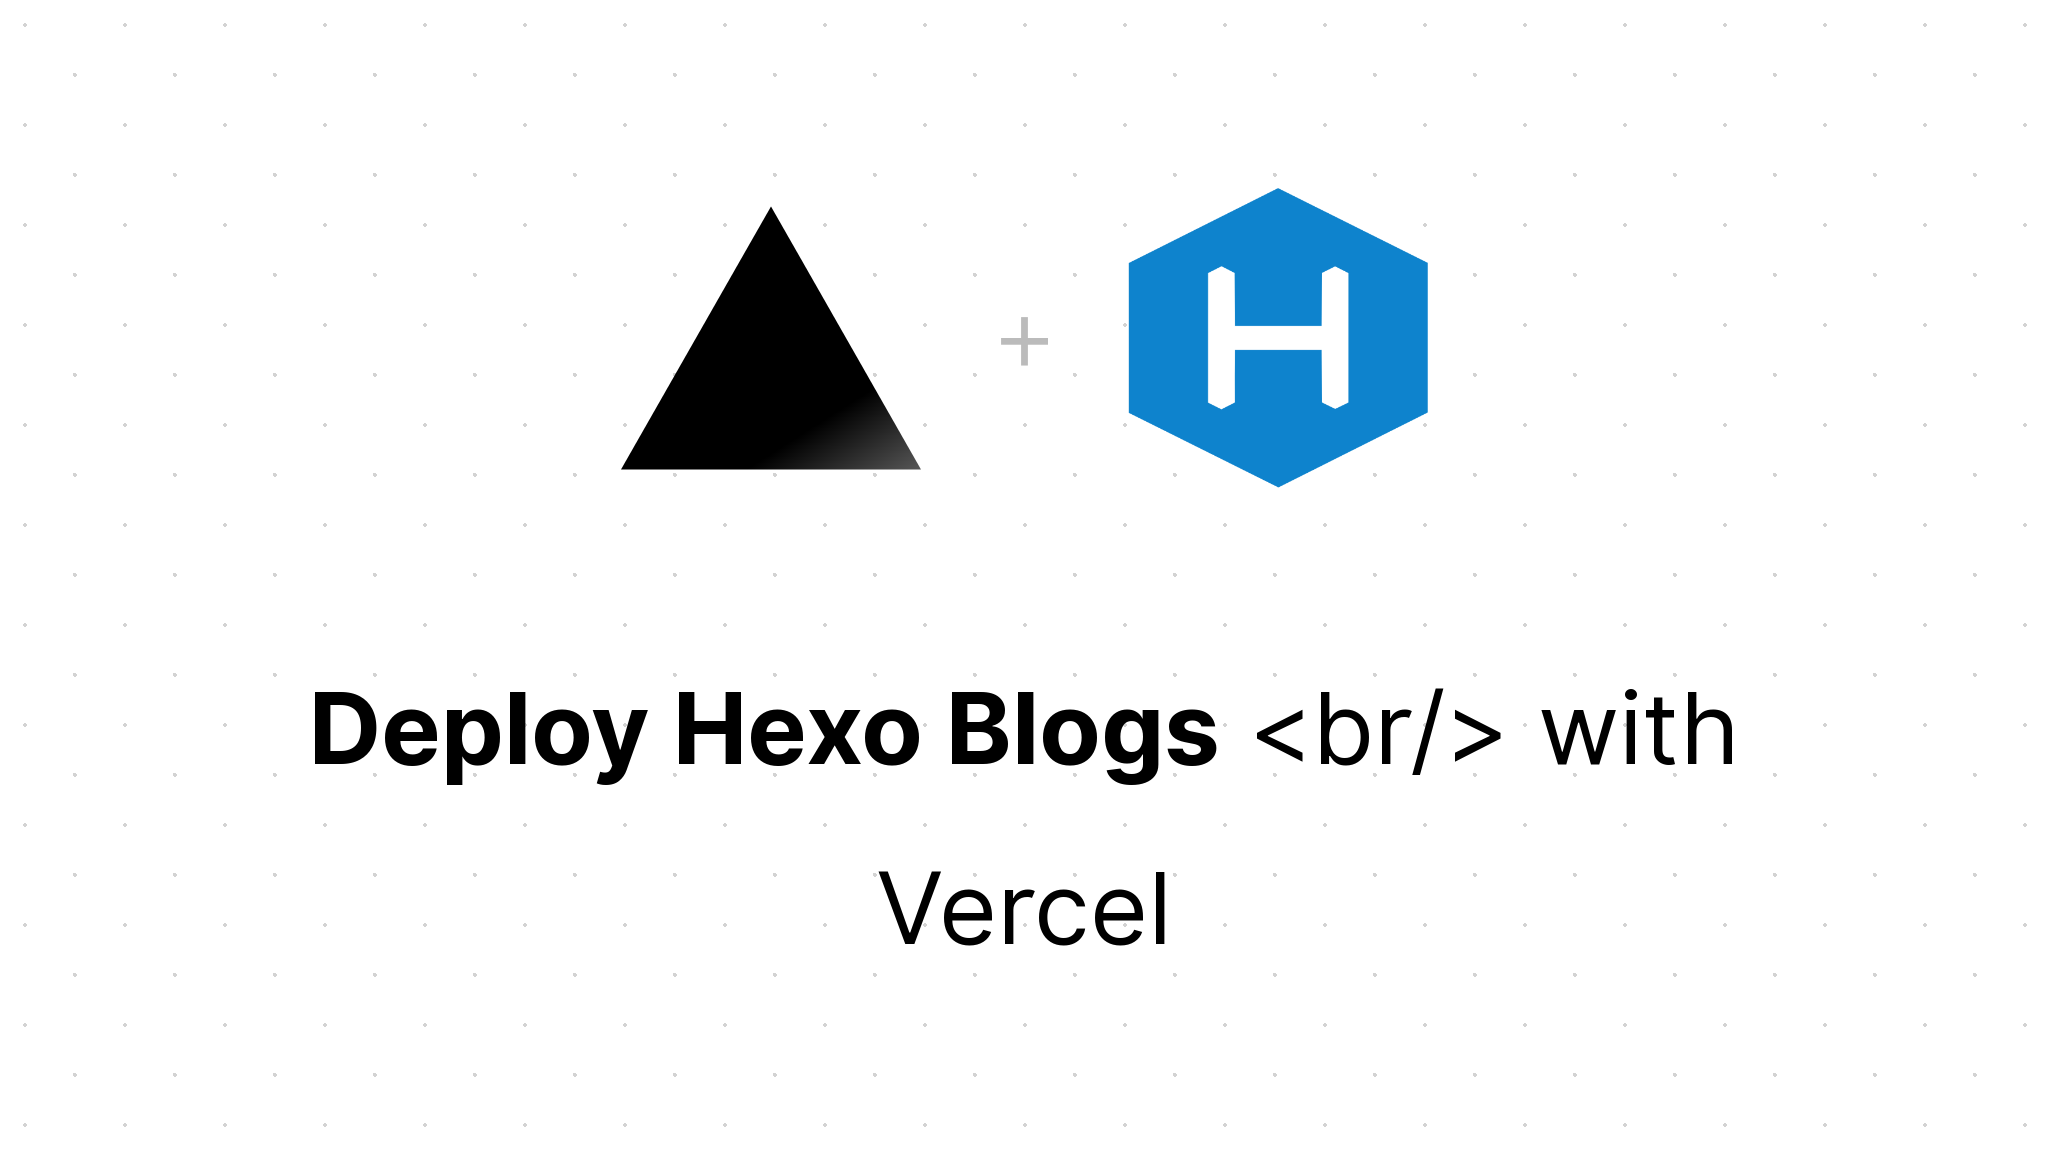 How to Deploy a Hexo Blog with Vercel